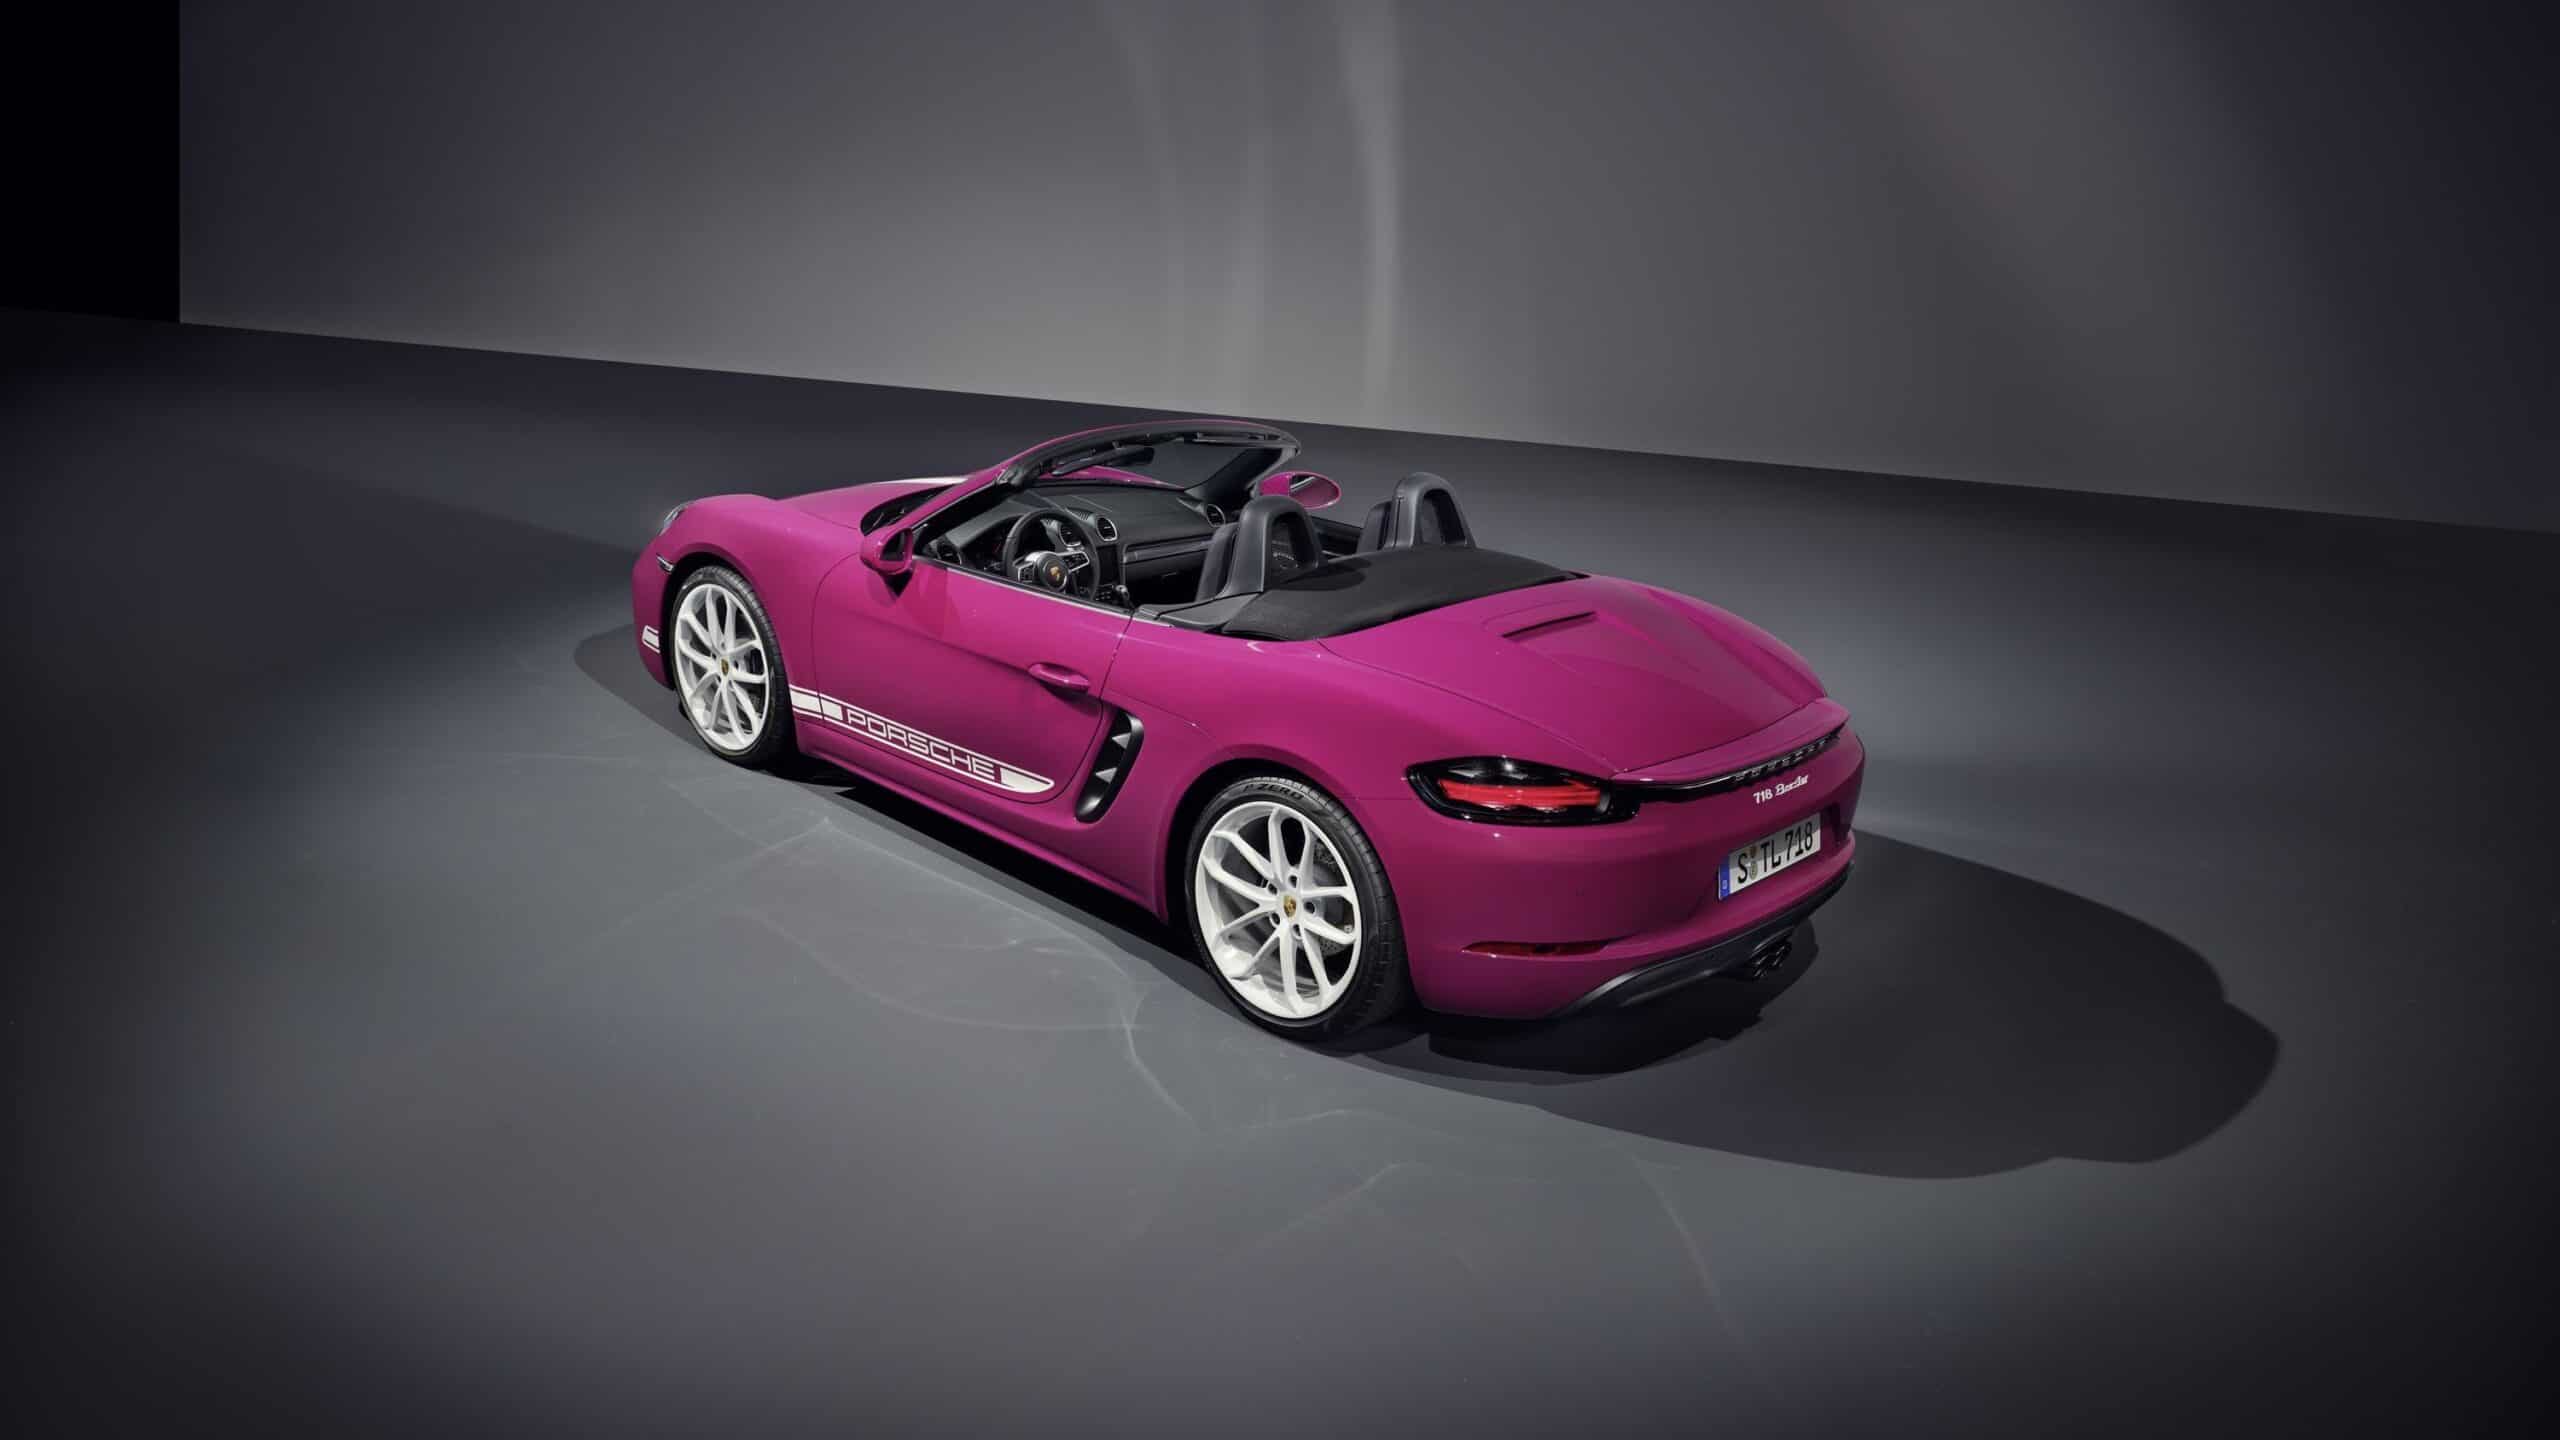 It’s Not Pink! Porsche Introduces New Ruby Star Neo Color